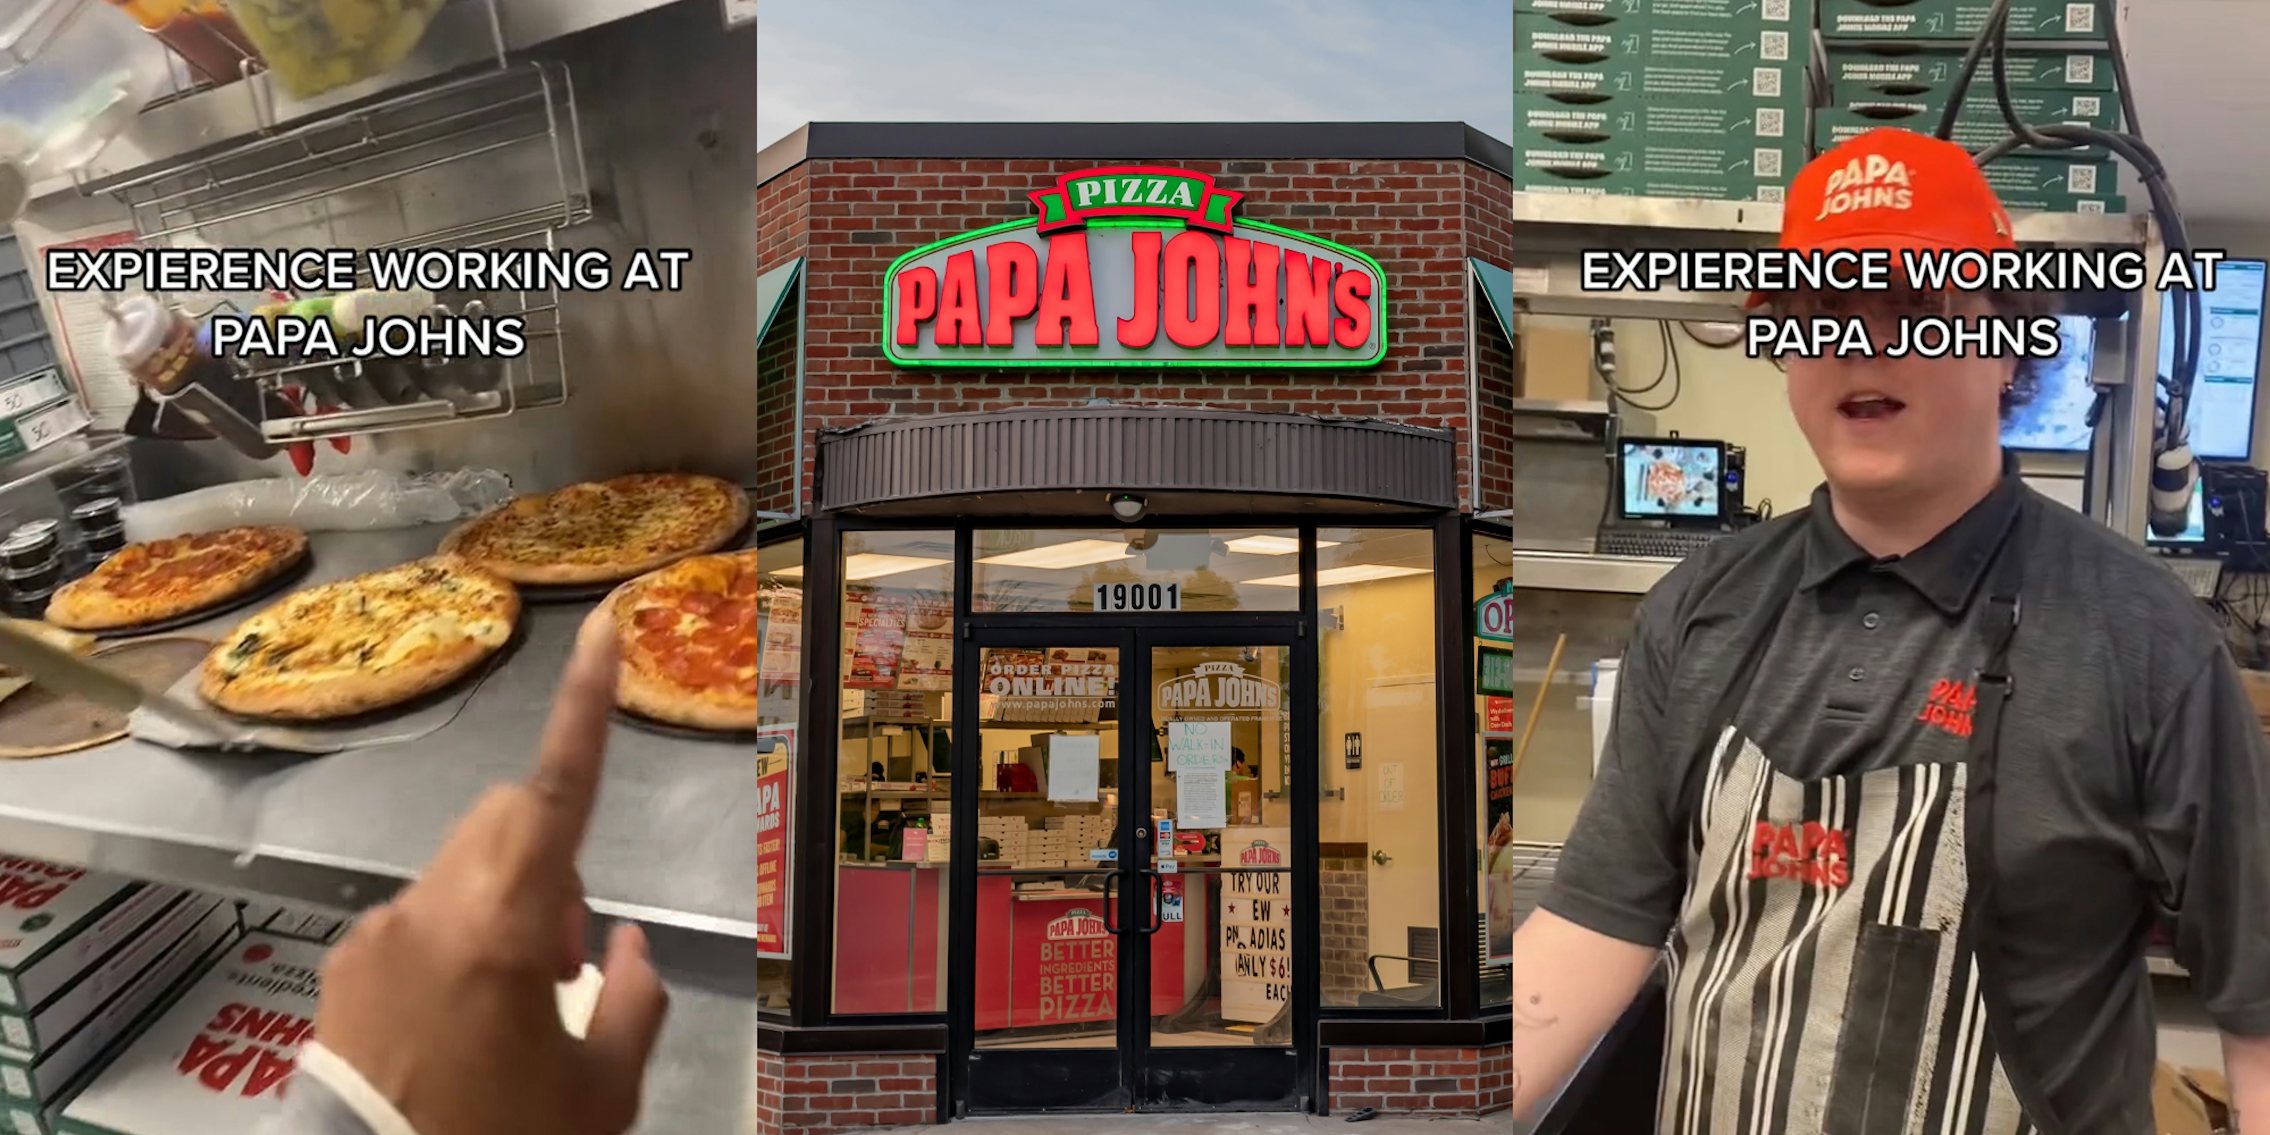 Papa John's worker pointing at pizzas with caption 'EXPERIENCE WORKING AT PAPA JOHNS' (l) Papa John's building with sign (c) Papa John's manager speaking with caption 'EXPERIENCE WORKING AT PAPA JOHNS' (r)